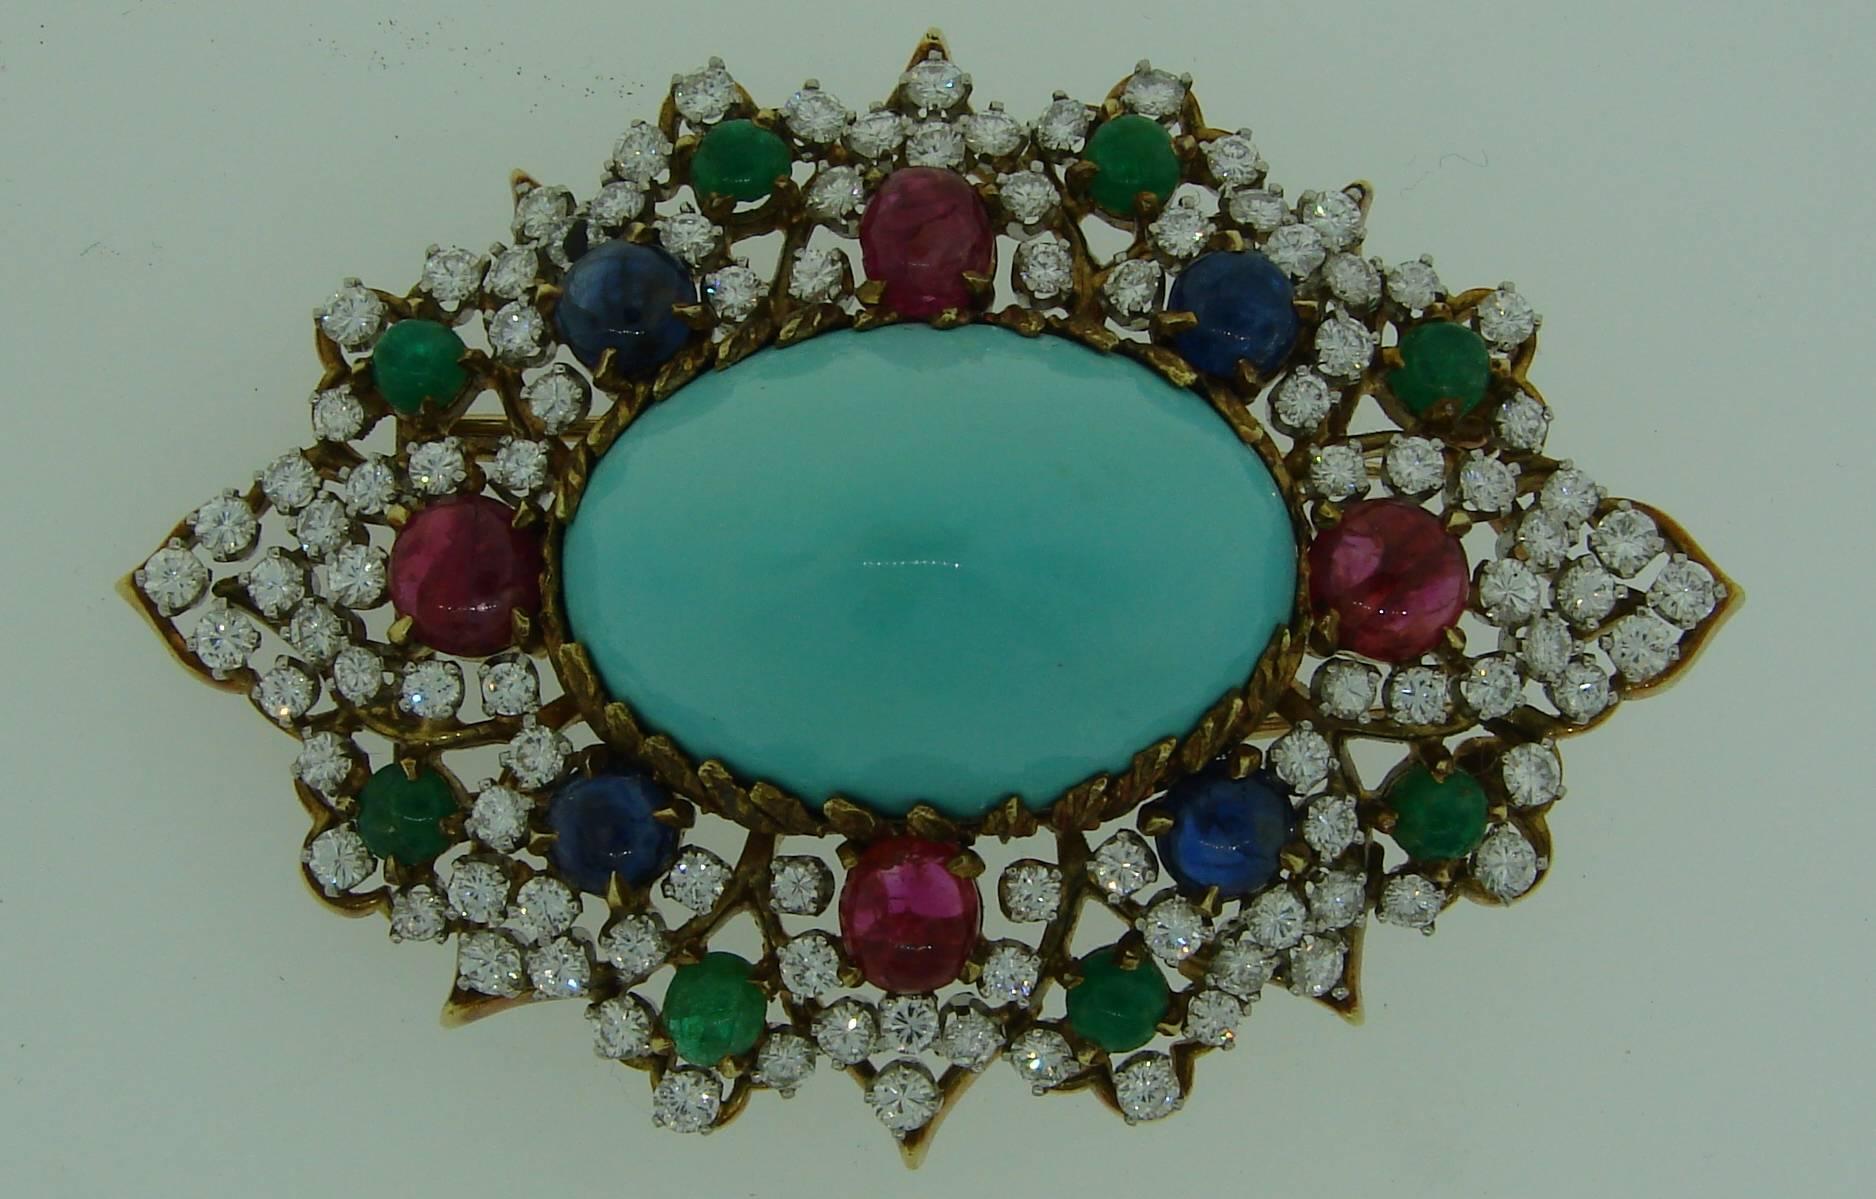 Gorgeous colorful brooch created in the 1970s. Features a beautiful turquoise embedded in a diamond and multi-gem frame. The stones are set in 18k (tested) yellow and white gold. The gems are ruby, emerald and sapphire cabochons, the diamonds are